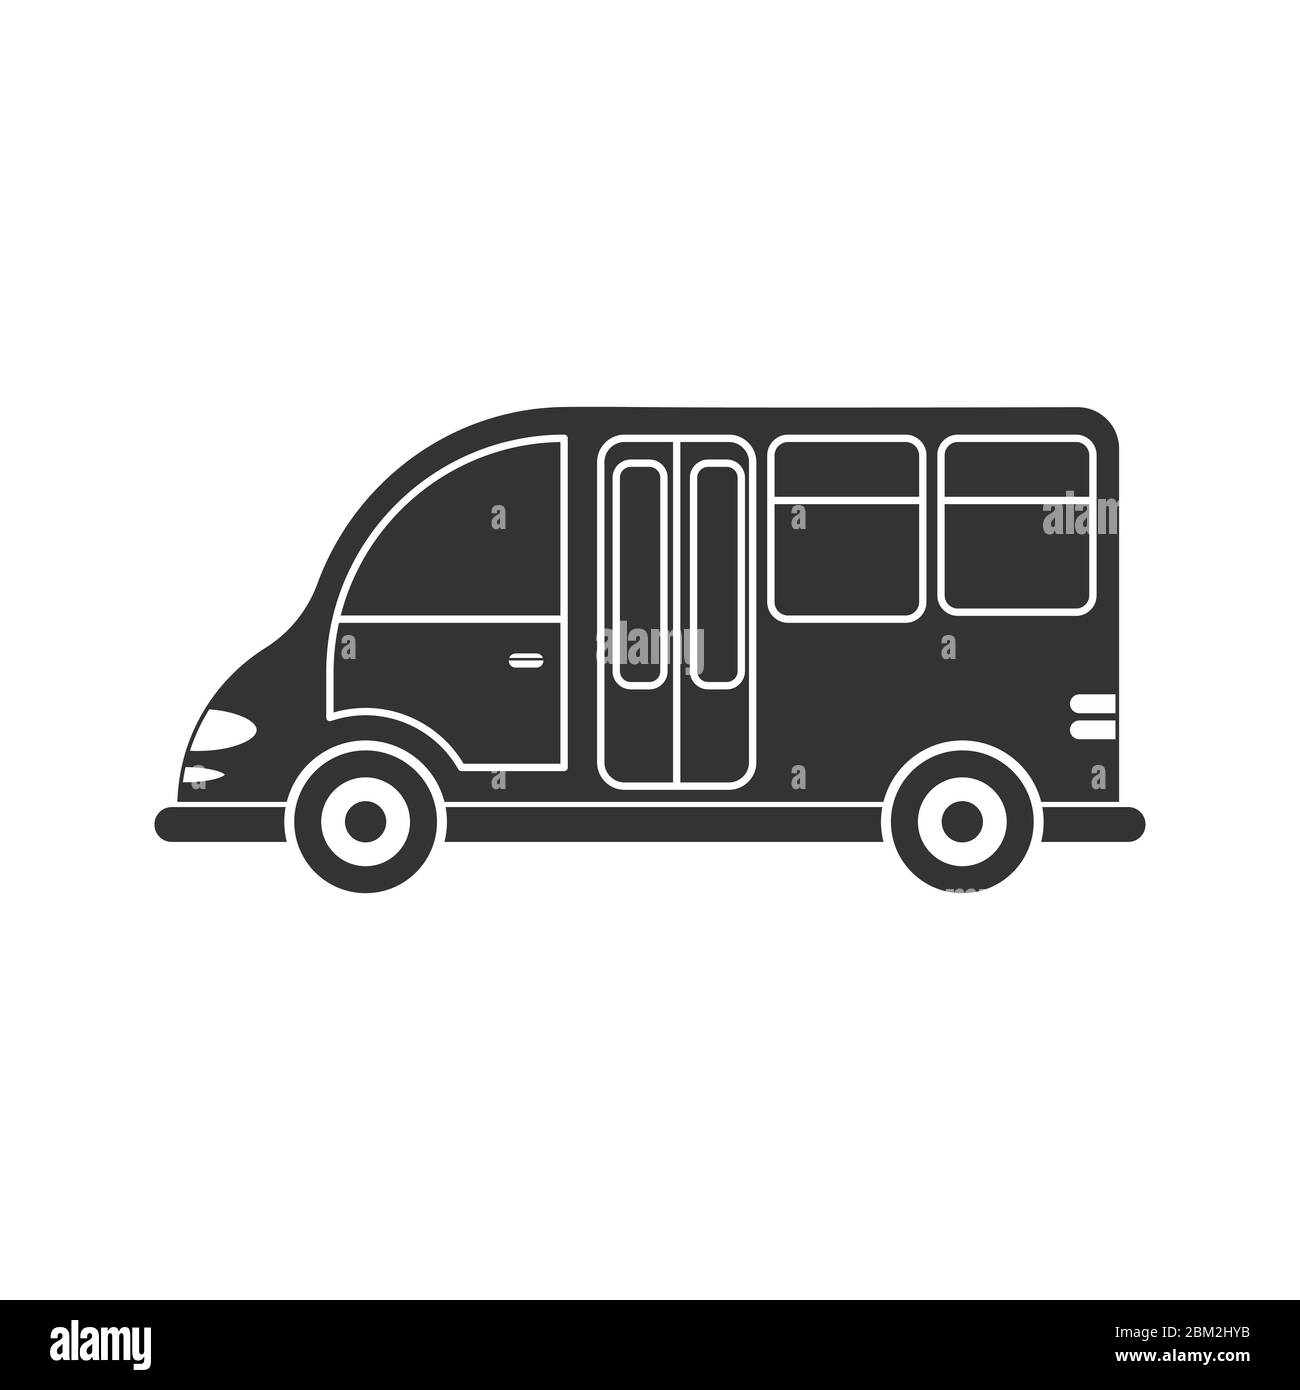 Vector icon of a car or commercial van. Simple design, filled silhouette isolated on white background. Design for coloring books, websites, and apps Stock Vector